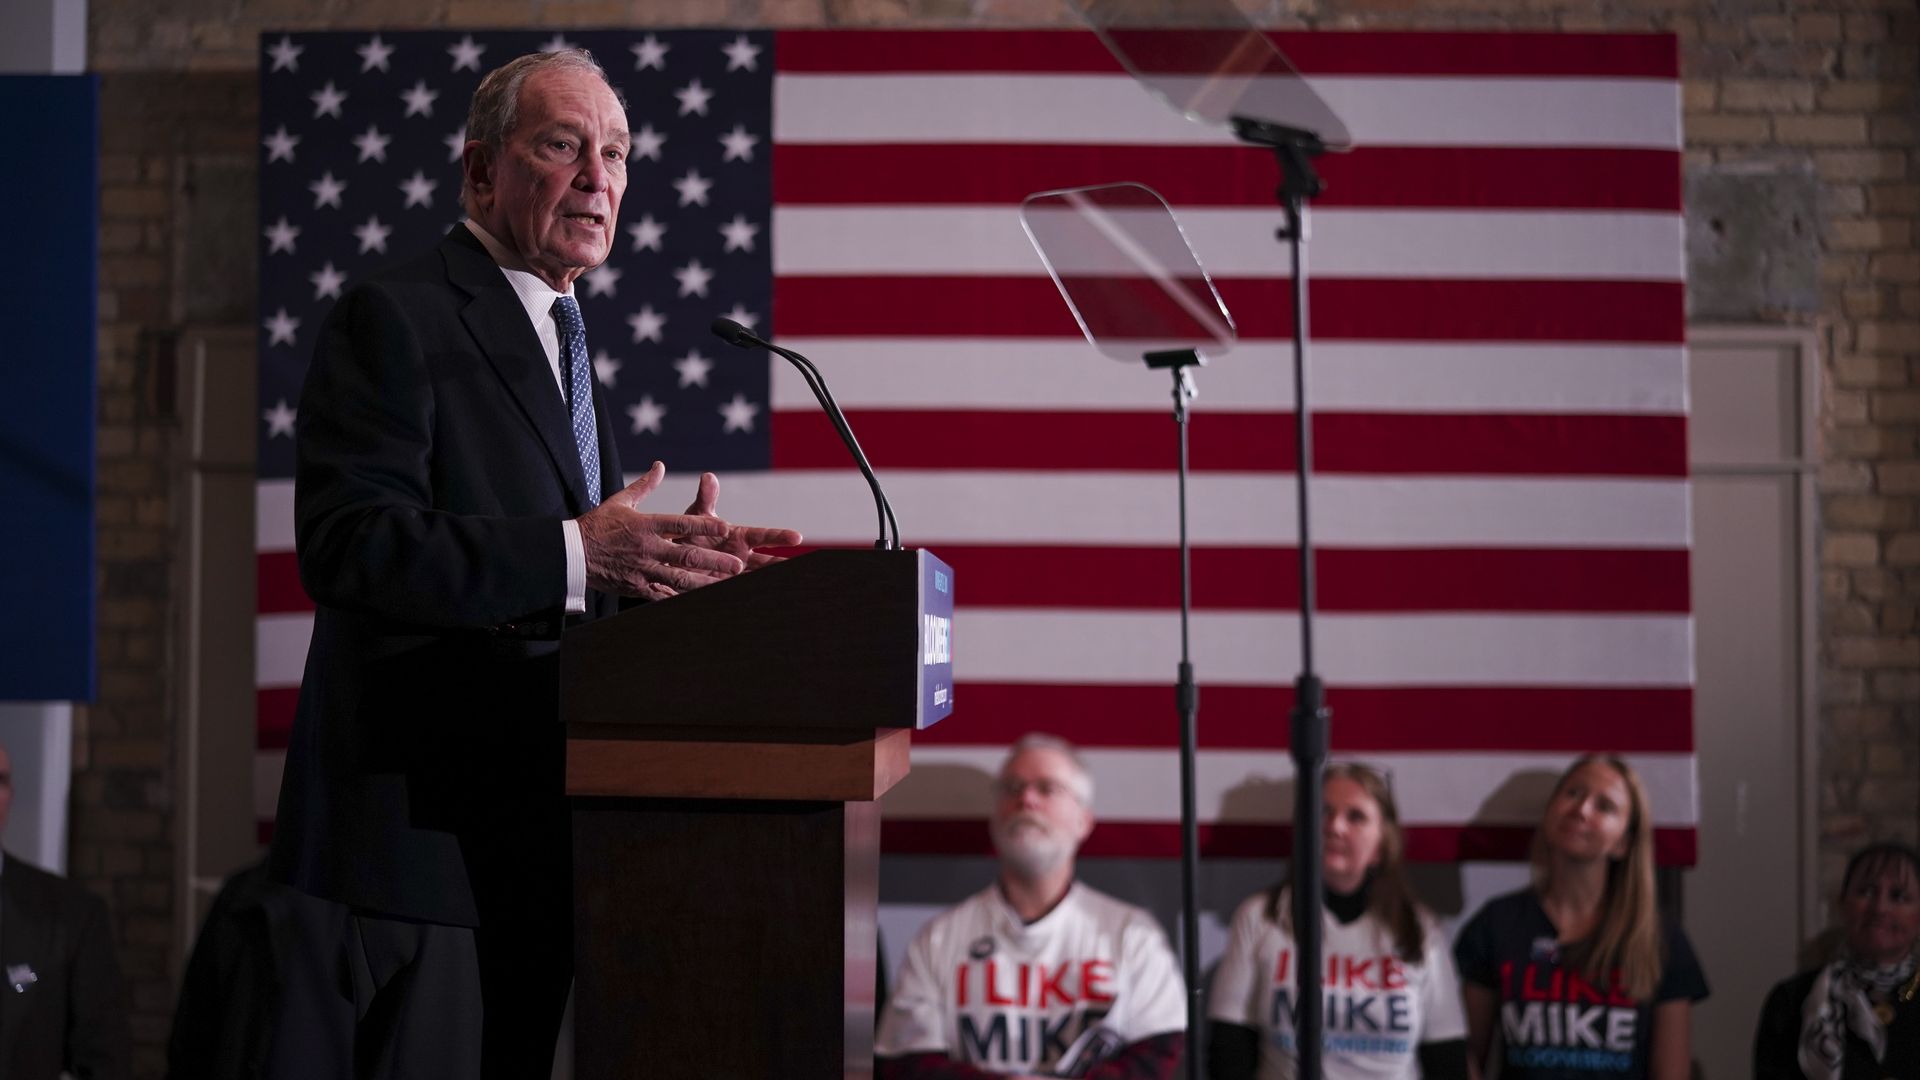 In this image, Mike Bloomberg stands in front of an American flag while on the 2020 campaign trail